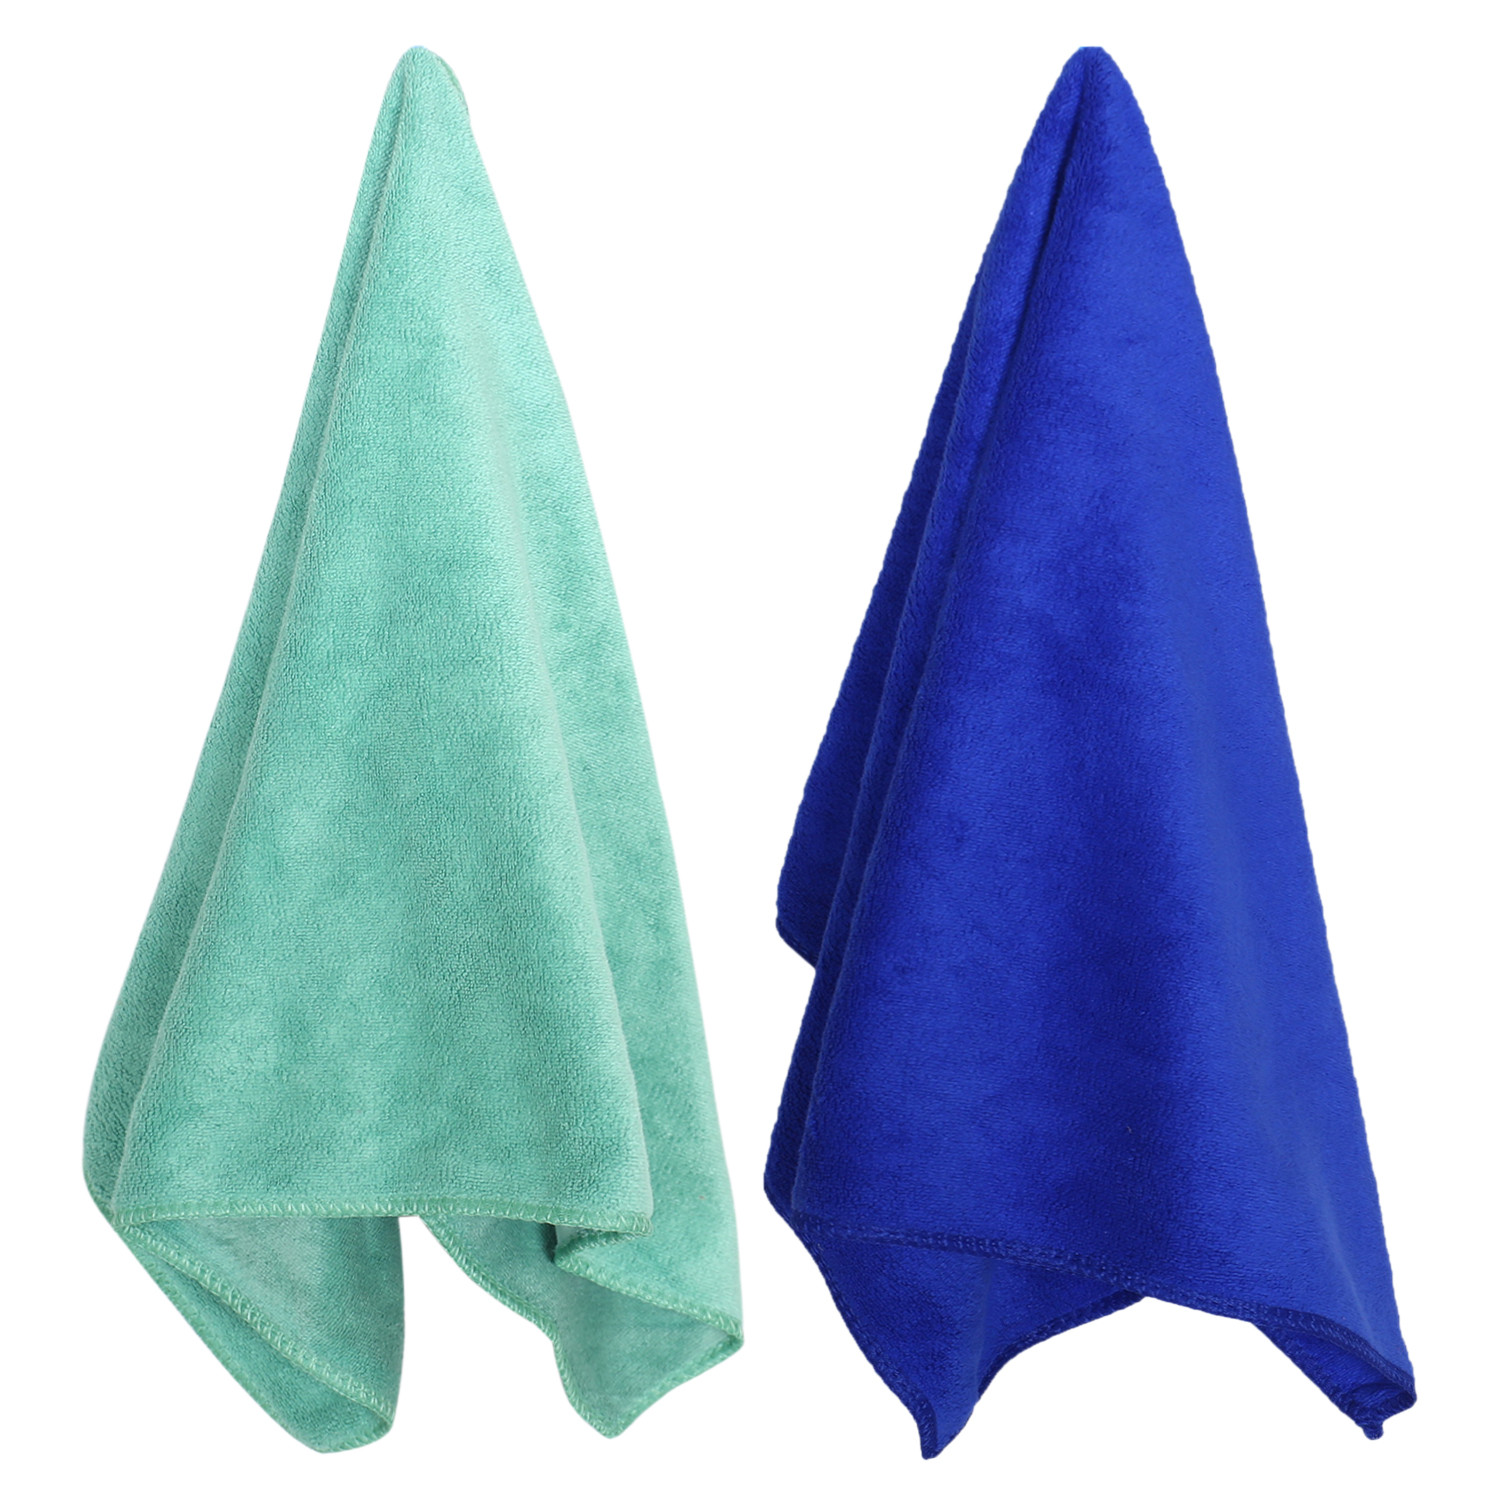 Kuber Industries Cleaning Cloths|Microfiber Highly Absorbent Wash Towels for Kitchen,Car,Window,24 x 16 Inch,Pack of 2 (Green & Blue)